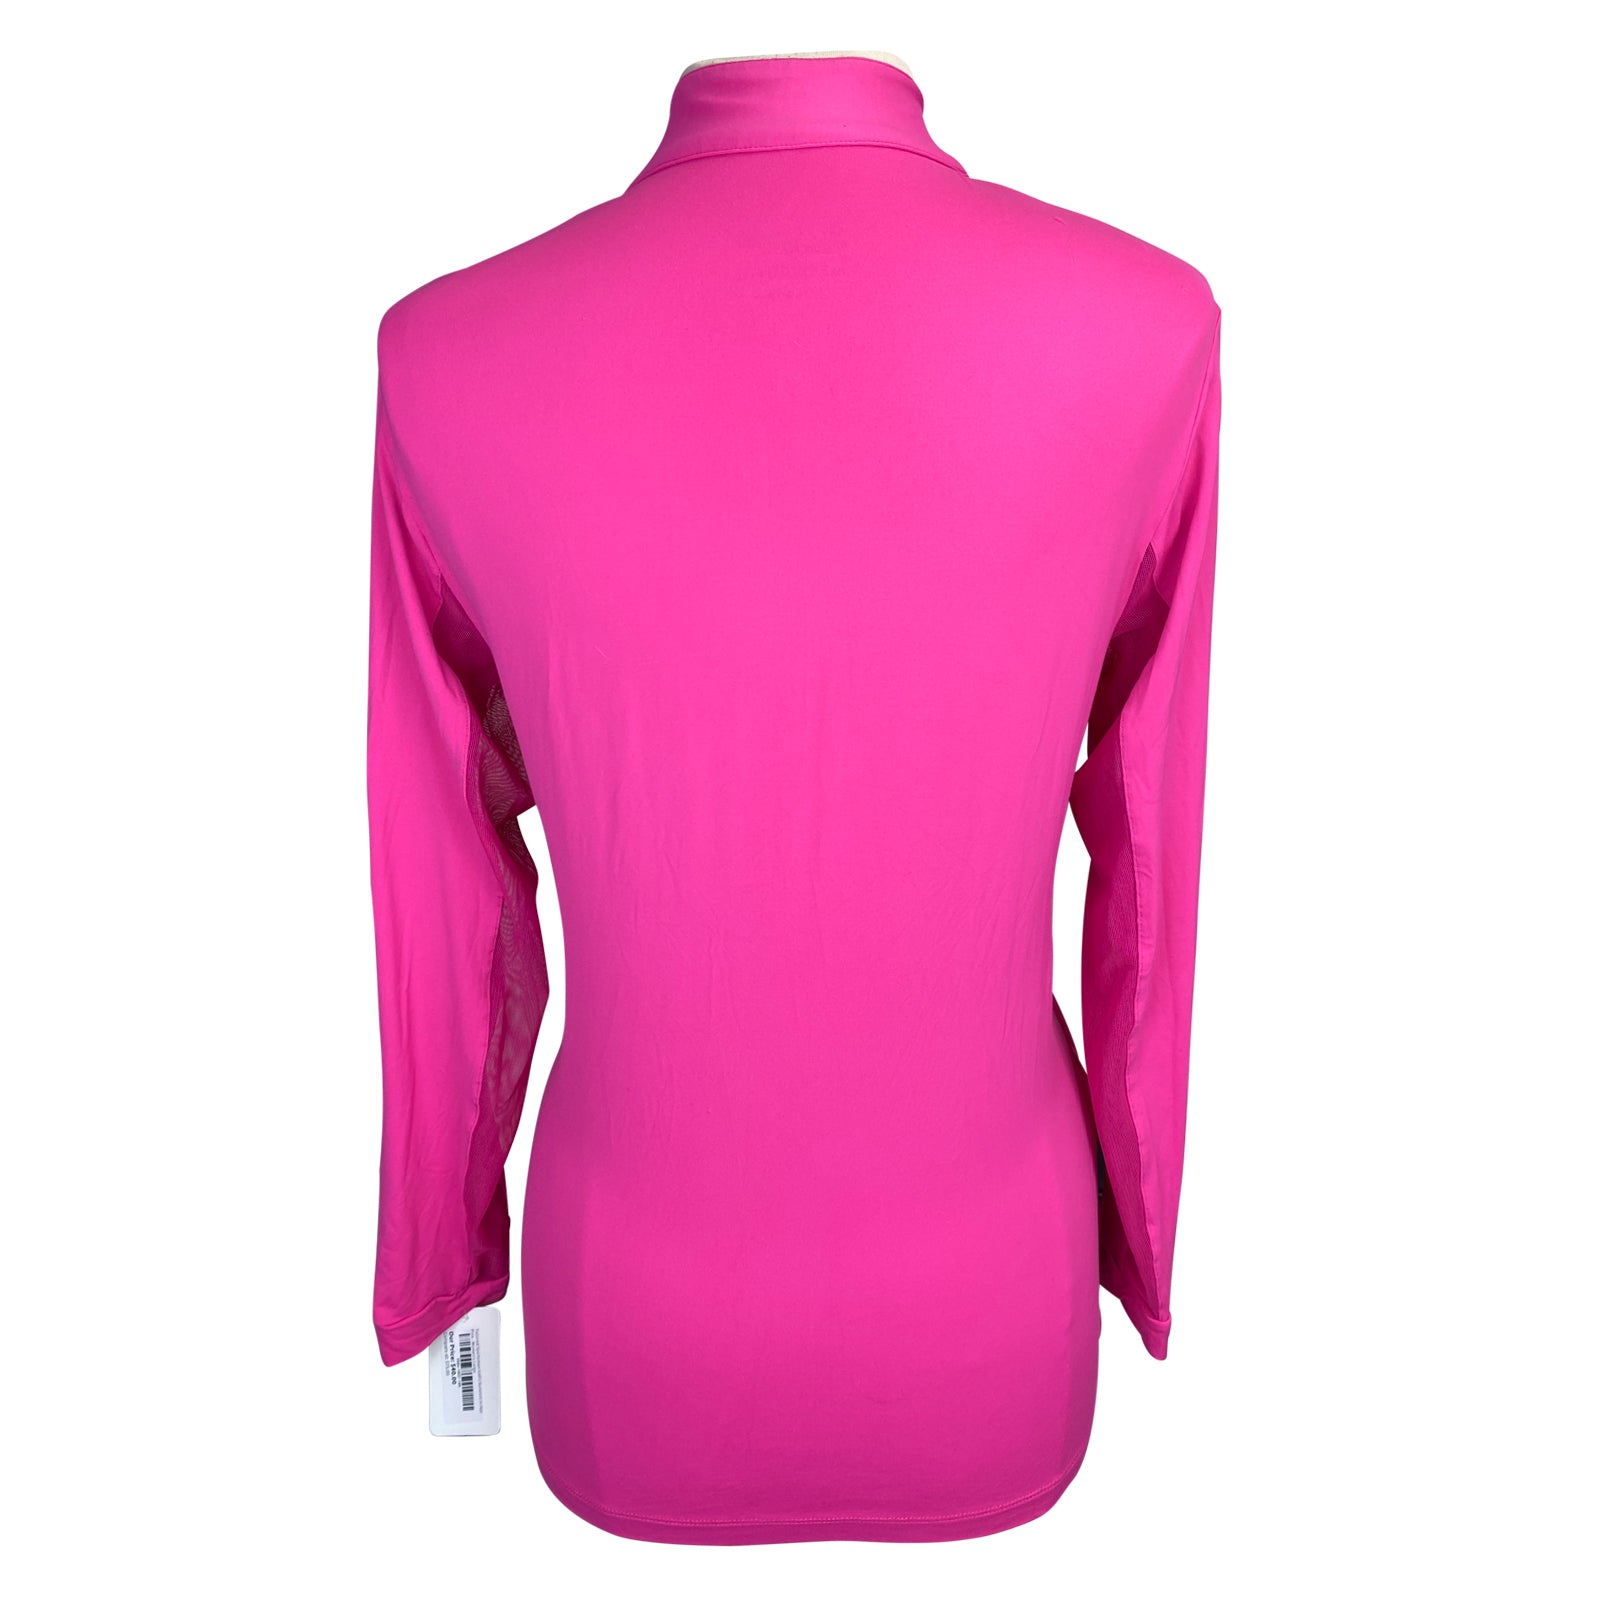 Back of Tailored Sportsman 'Ice Fil' Shirt in Hot Pink